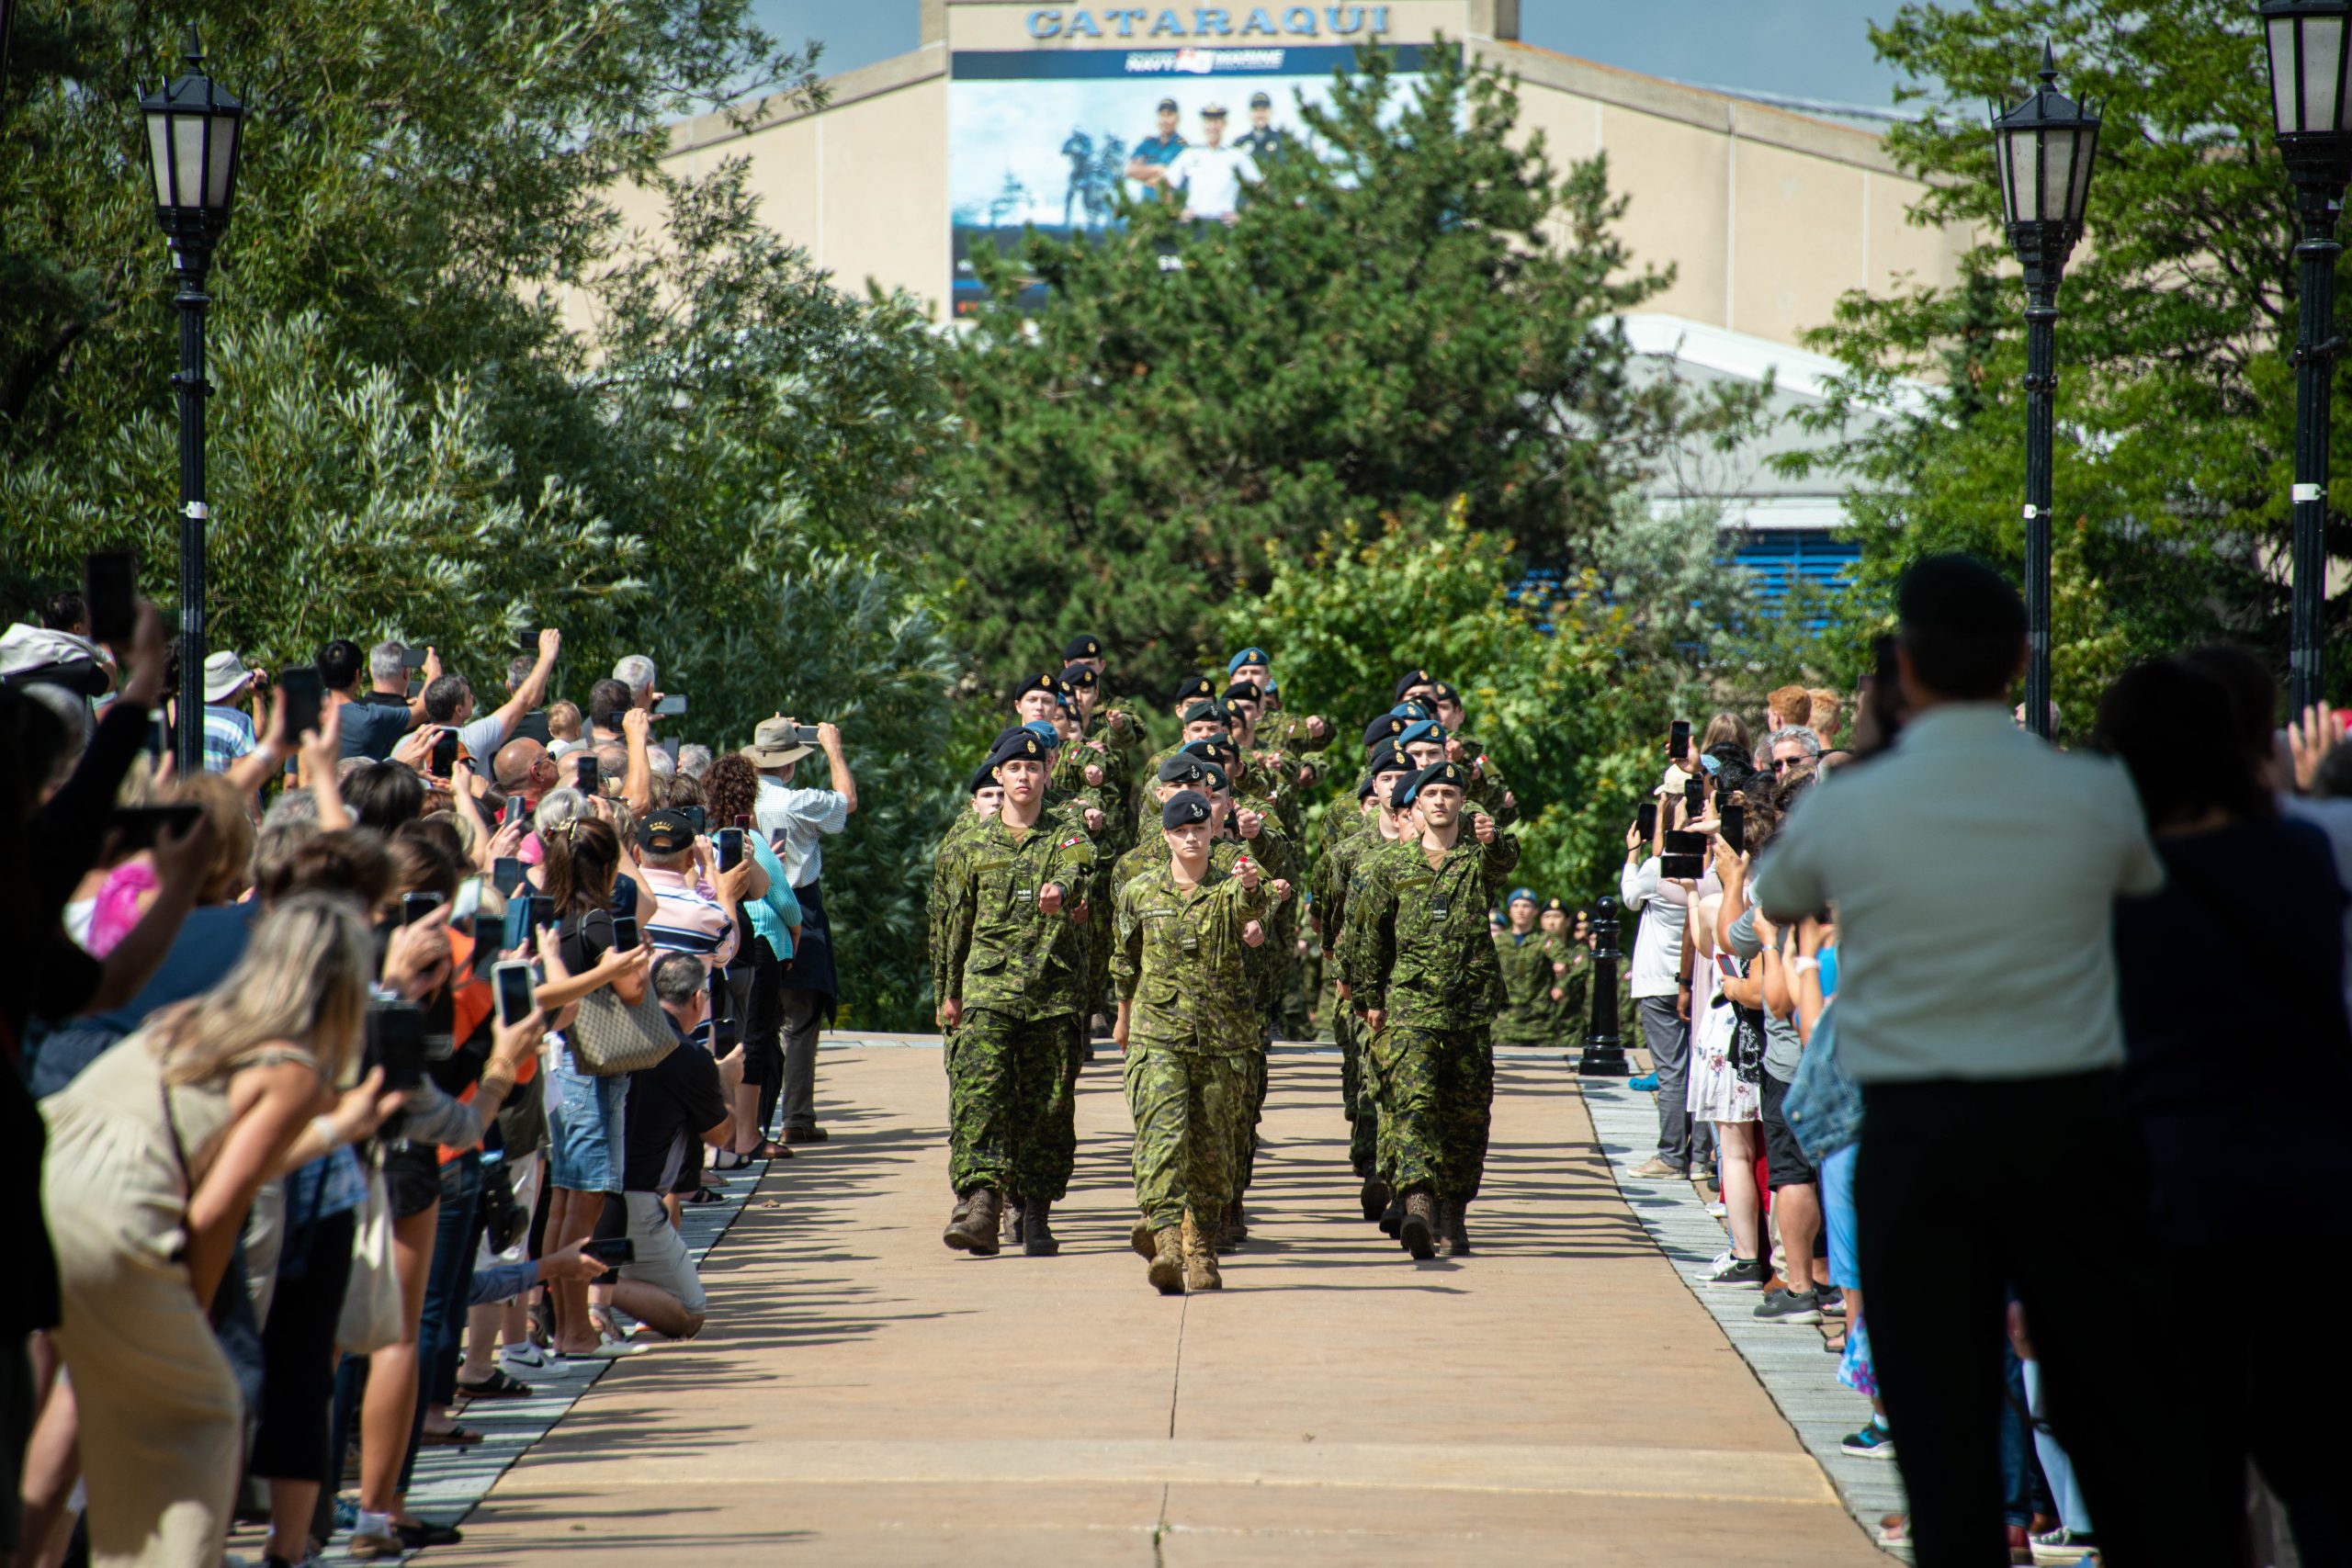 RMC Class of 2026 arrive for the first time on Sunday, August 21, 2022, marking the beginning of FYOP 2022. RMC, Kingston, ON August 21, 2022. Image by Avr Makala Rose, Imagery Technician, OJE, RMC, Kingston 2022-RMC2-0096